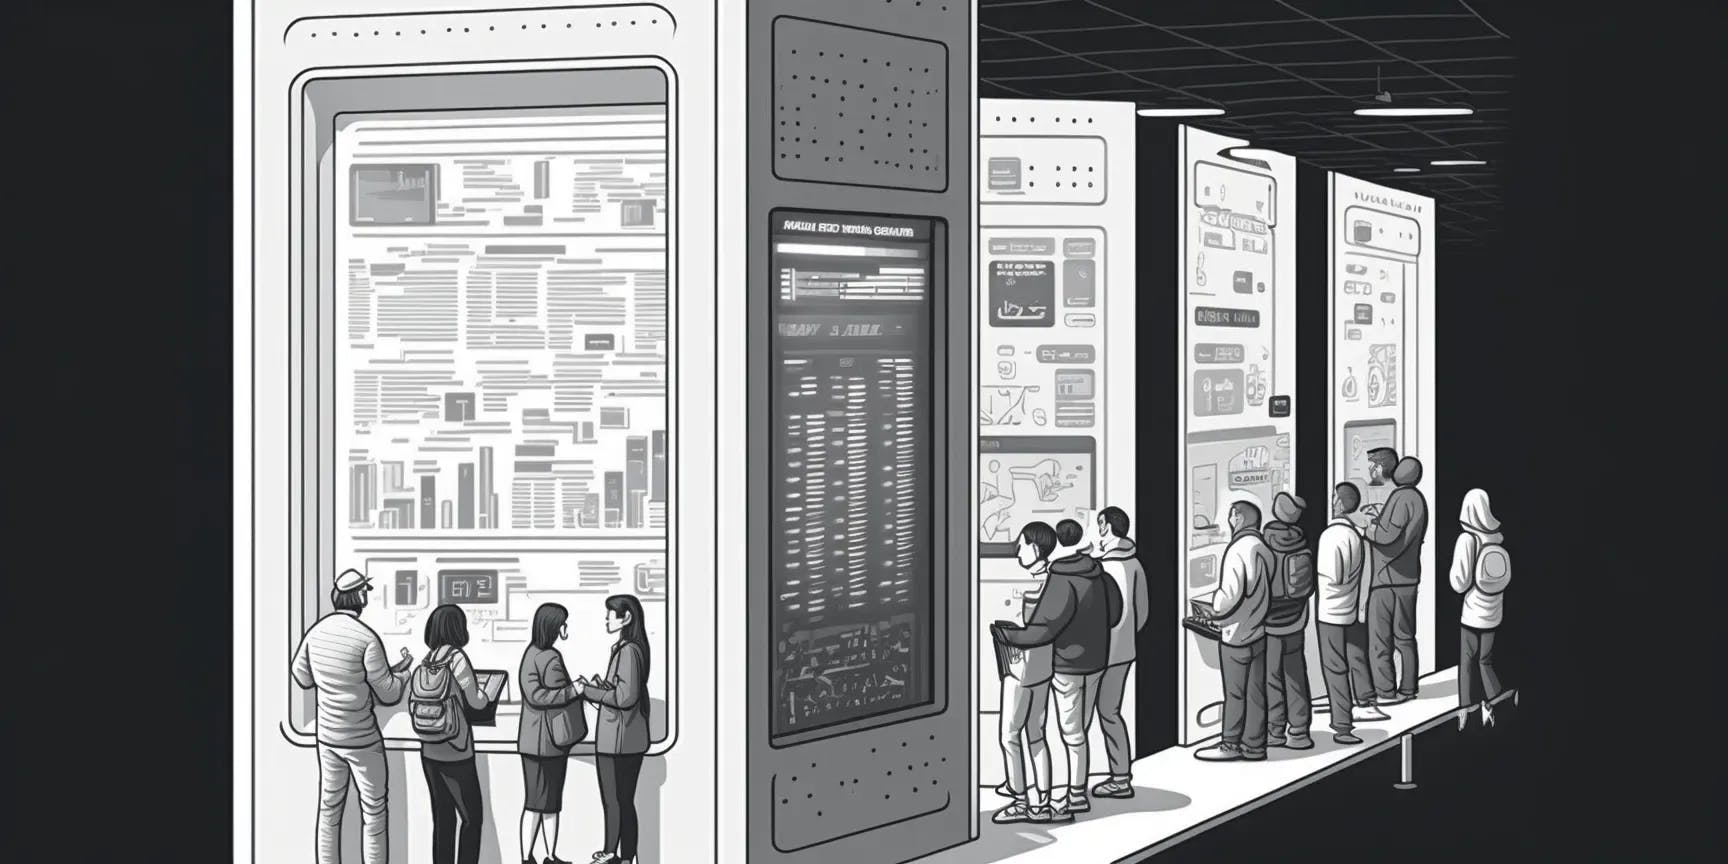 A row of big vending machines, with a line of people staring at each of them, representing a futuristic decentralized trading place.